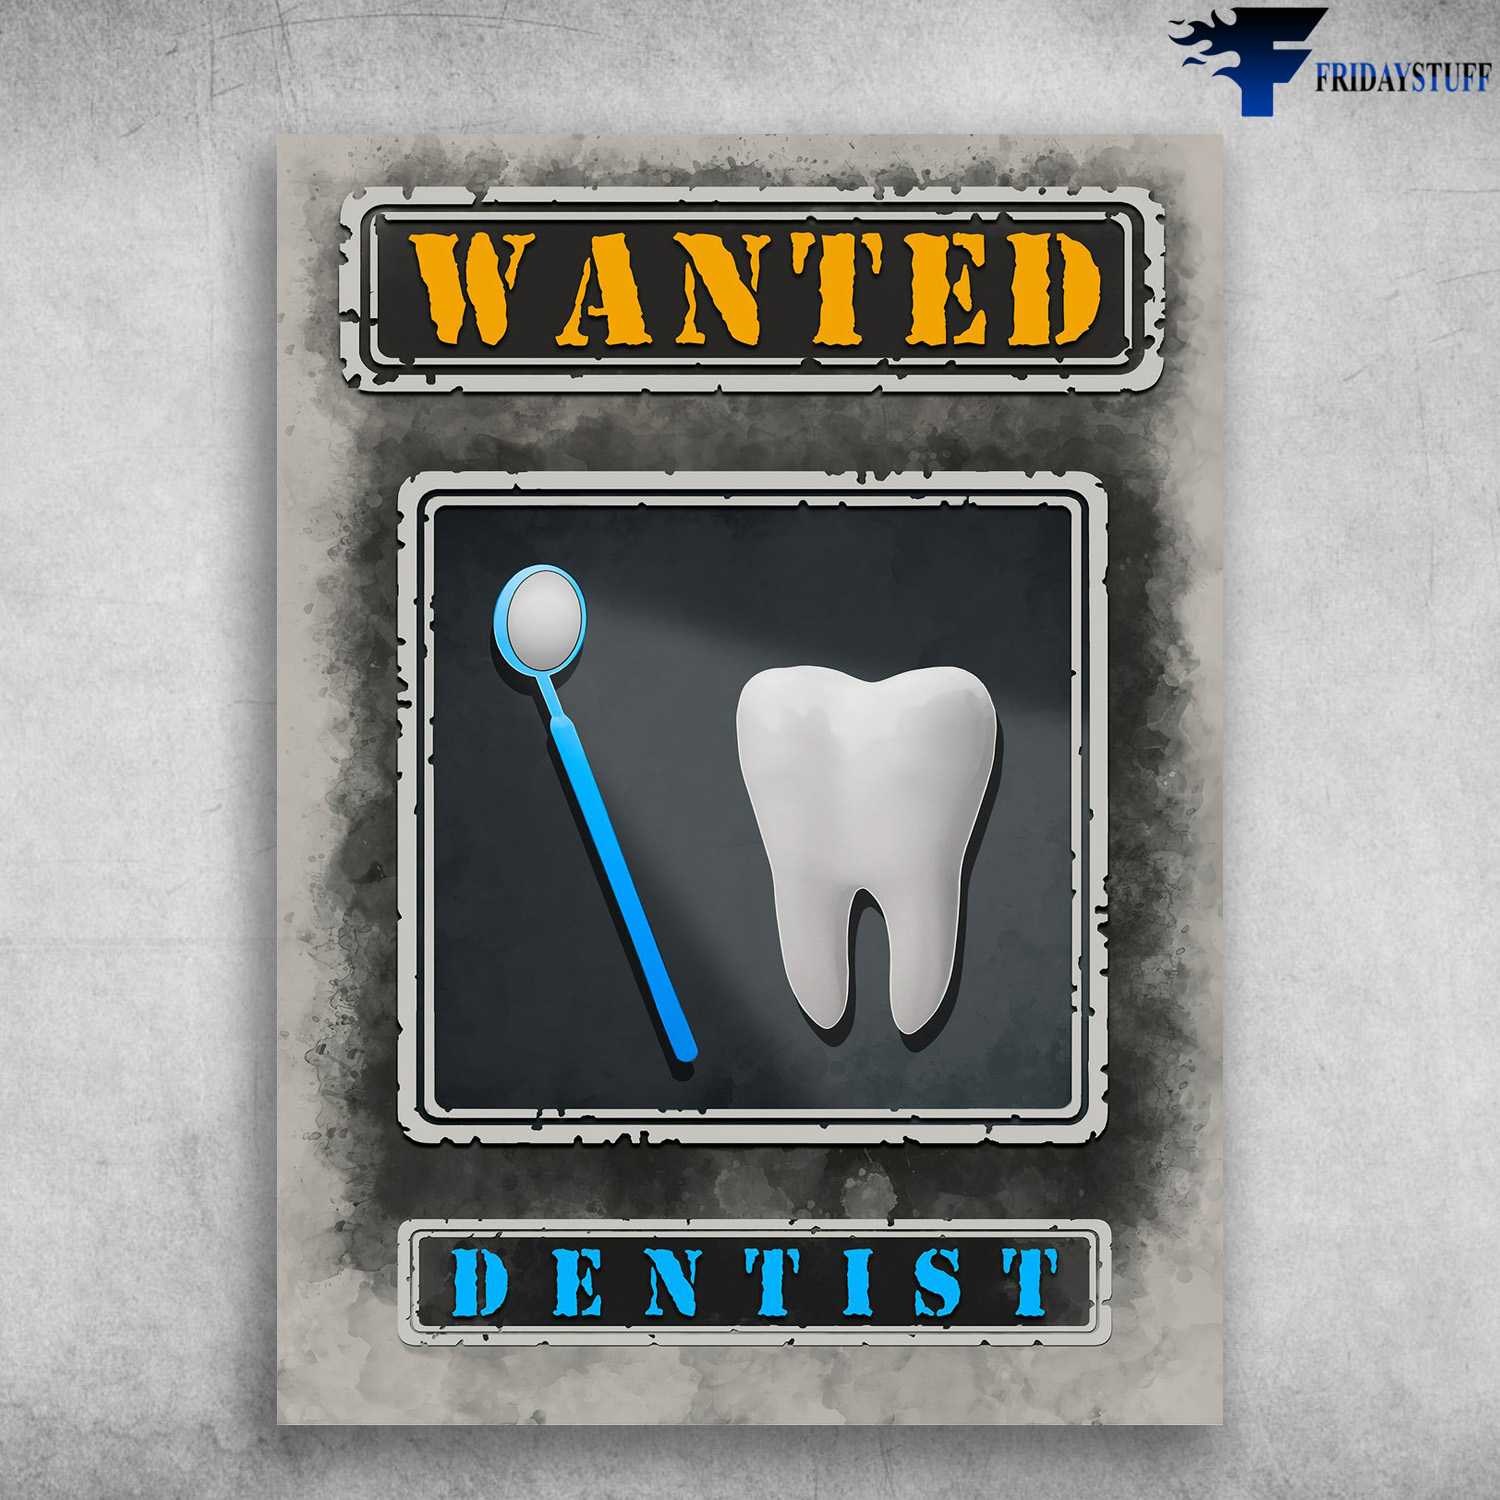 Dentist Poster, Wanted Dentist, Teeth care